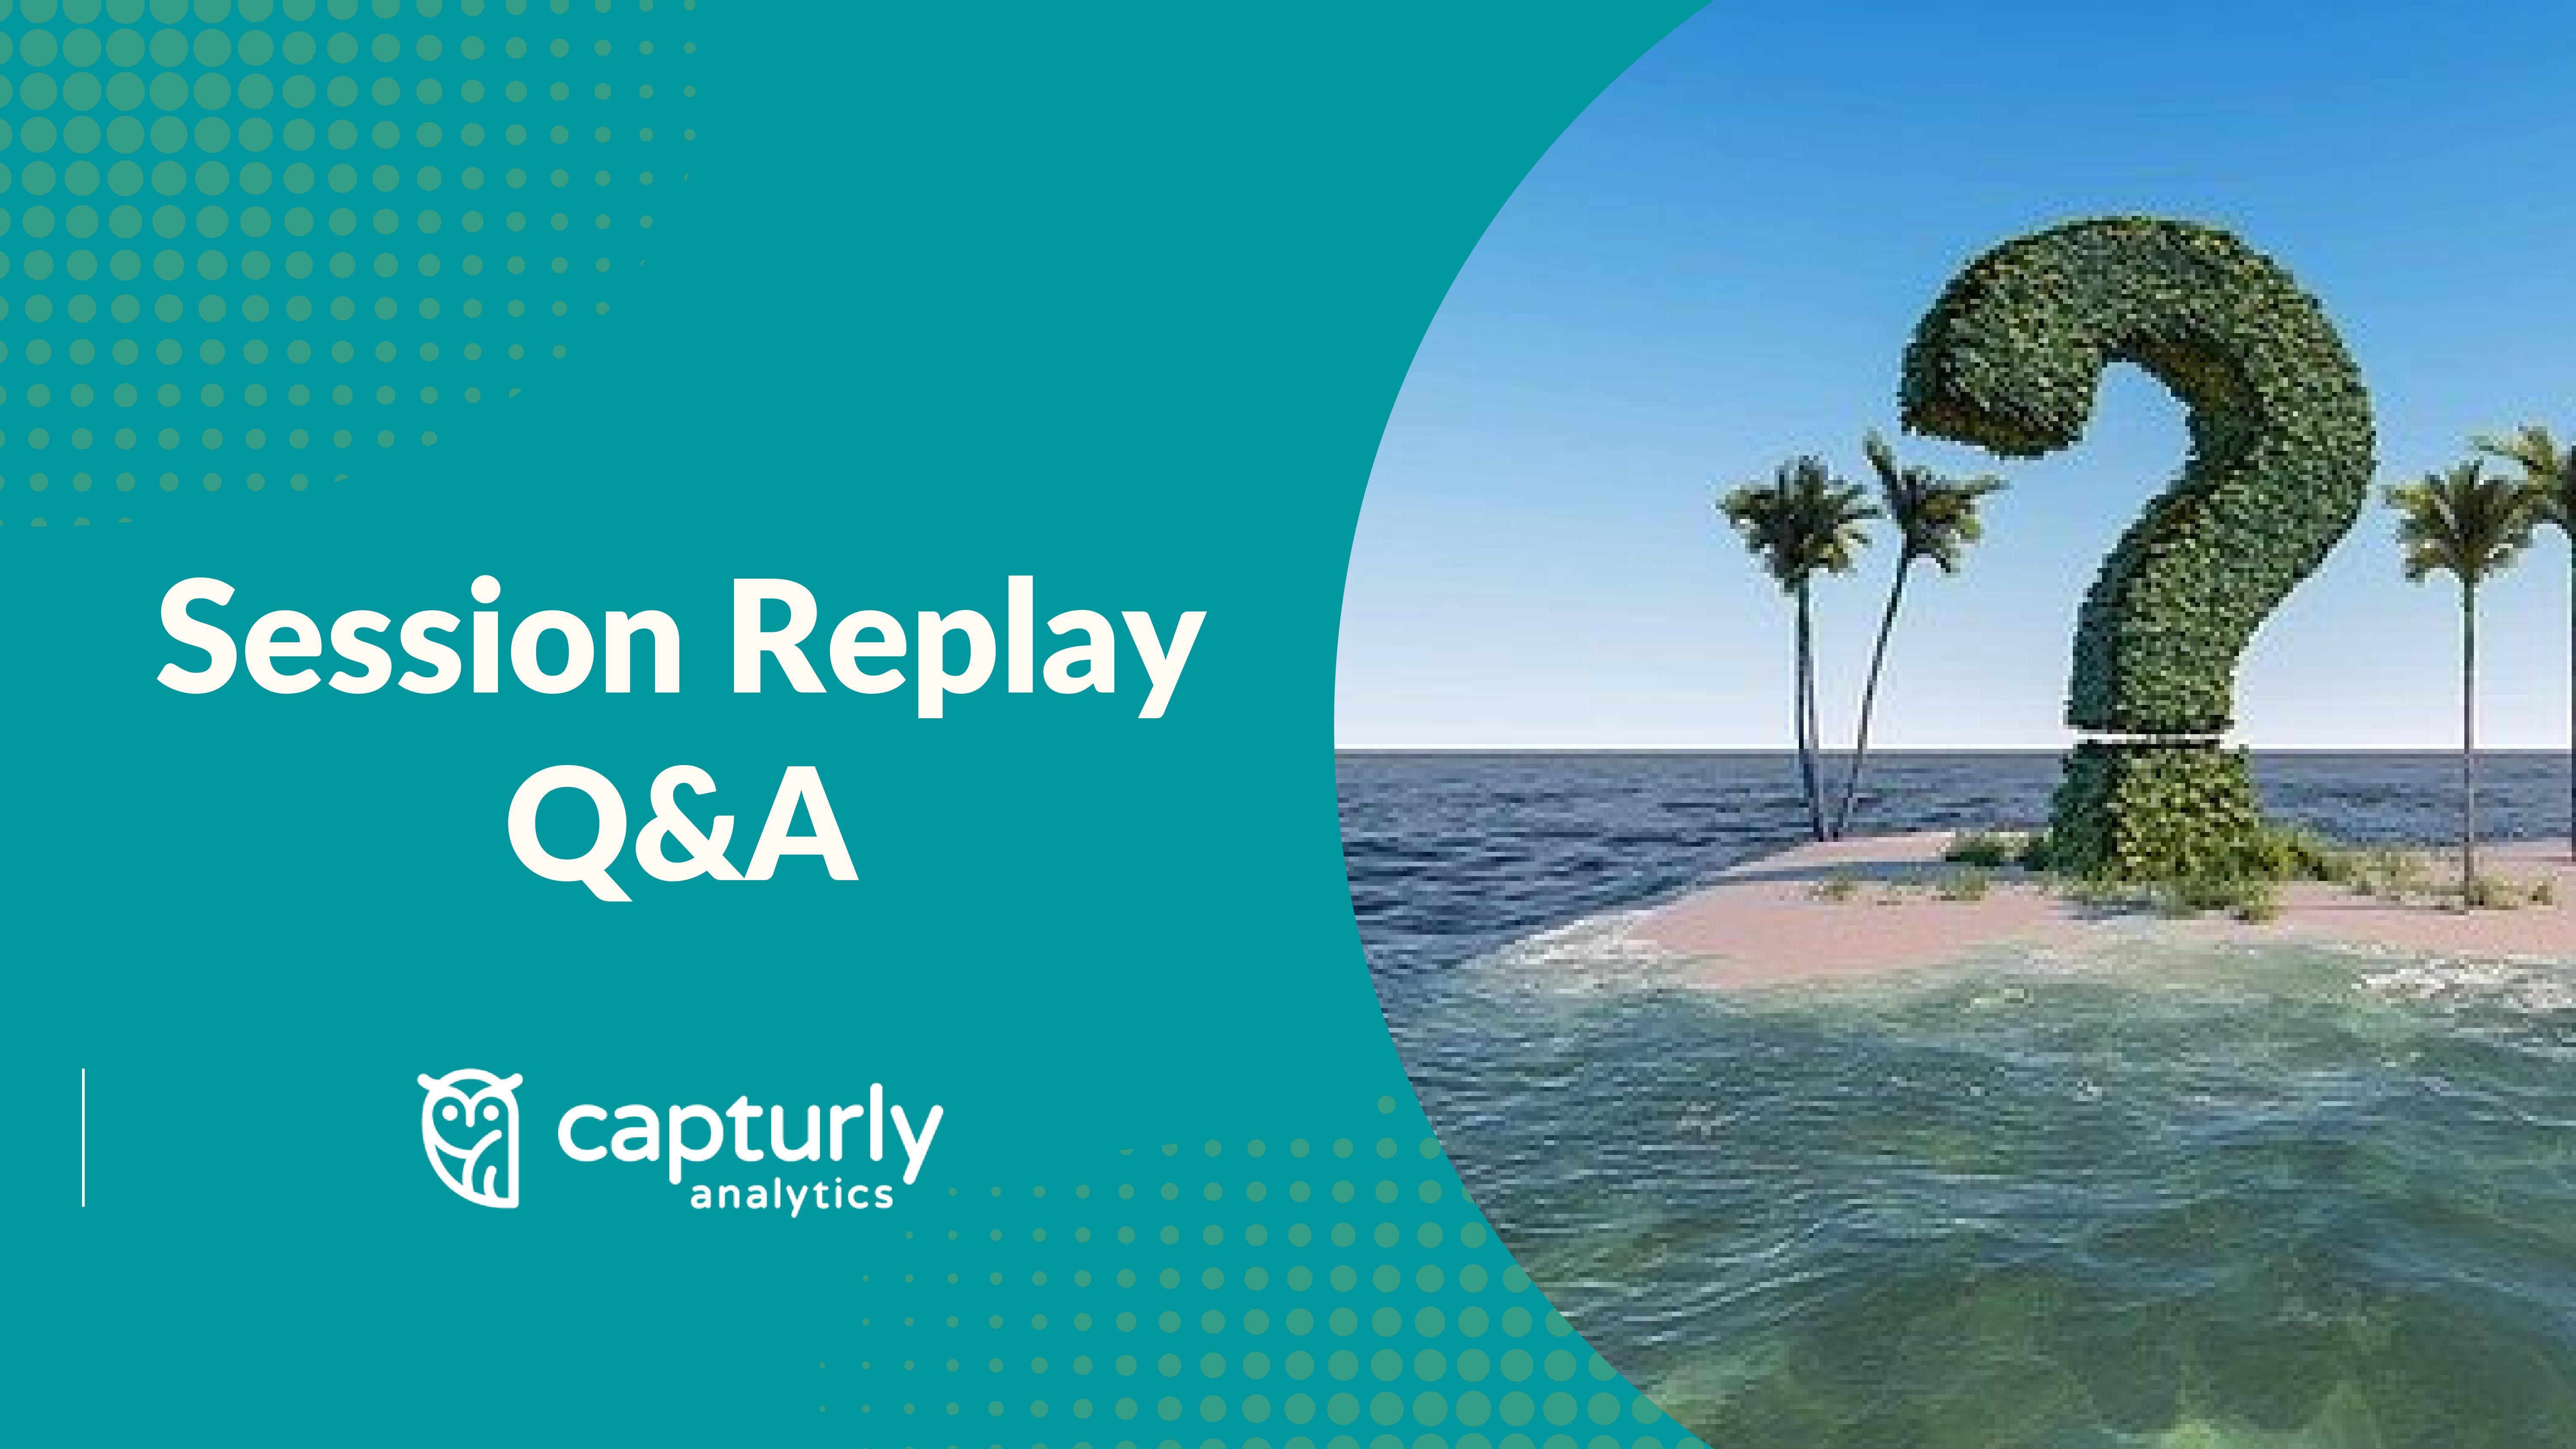 Session replay Q&A